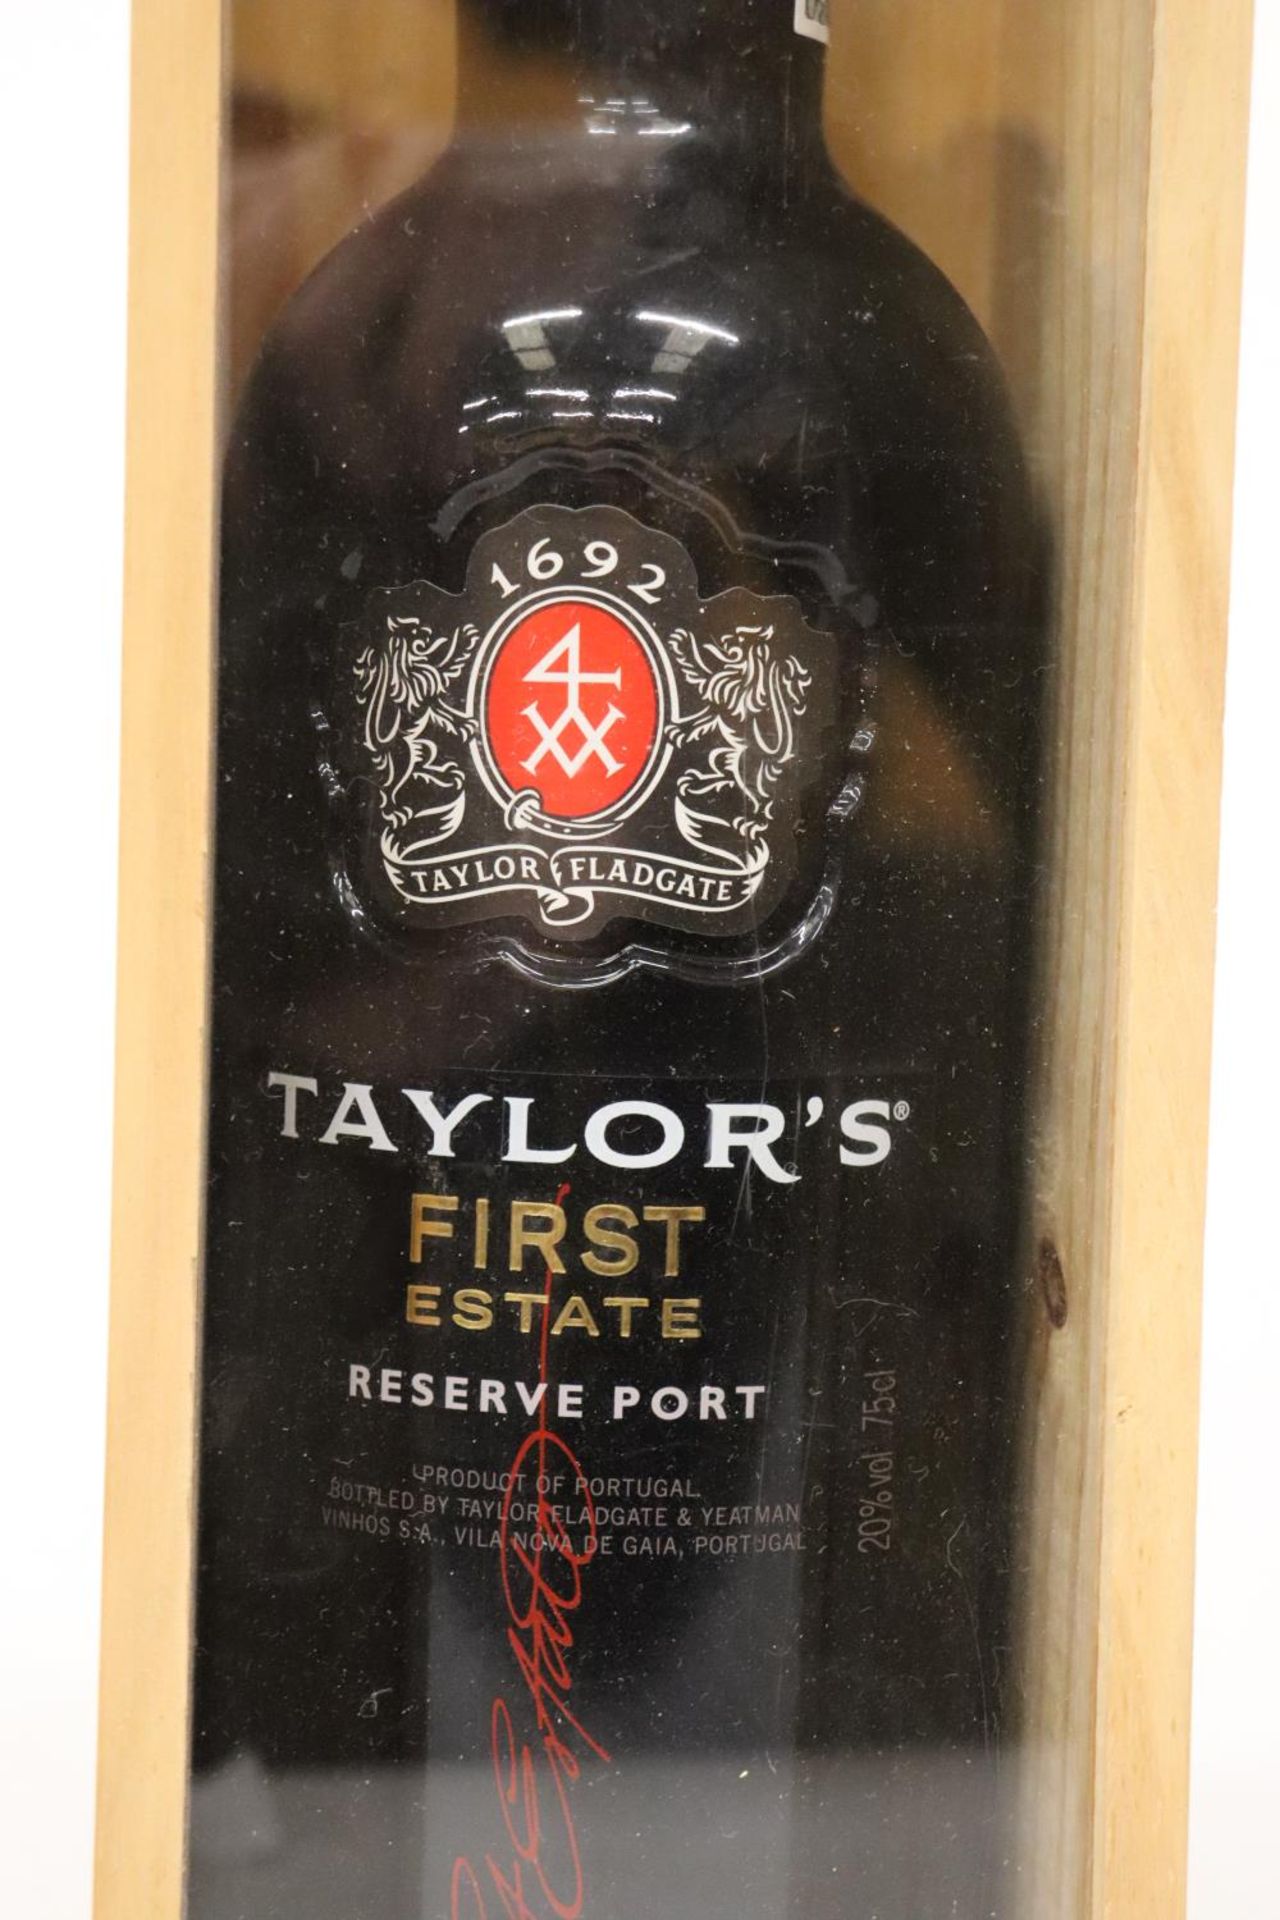 A BOTTLE OF TAYLORS 4XX FIRST ESTATE RESERVE PORT - Image 4 of 5